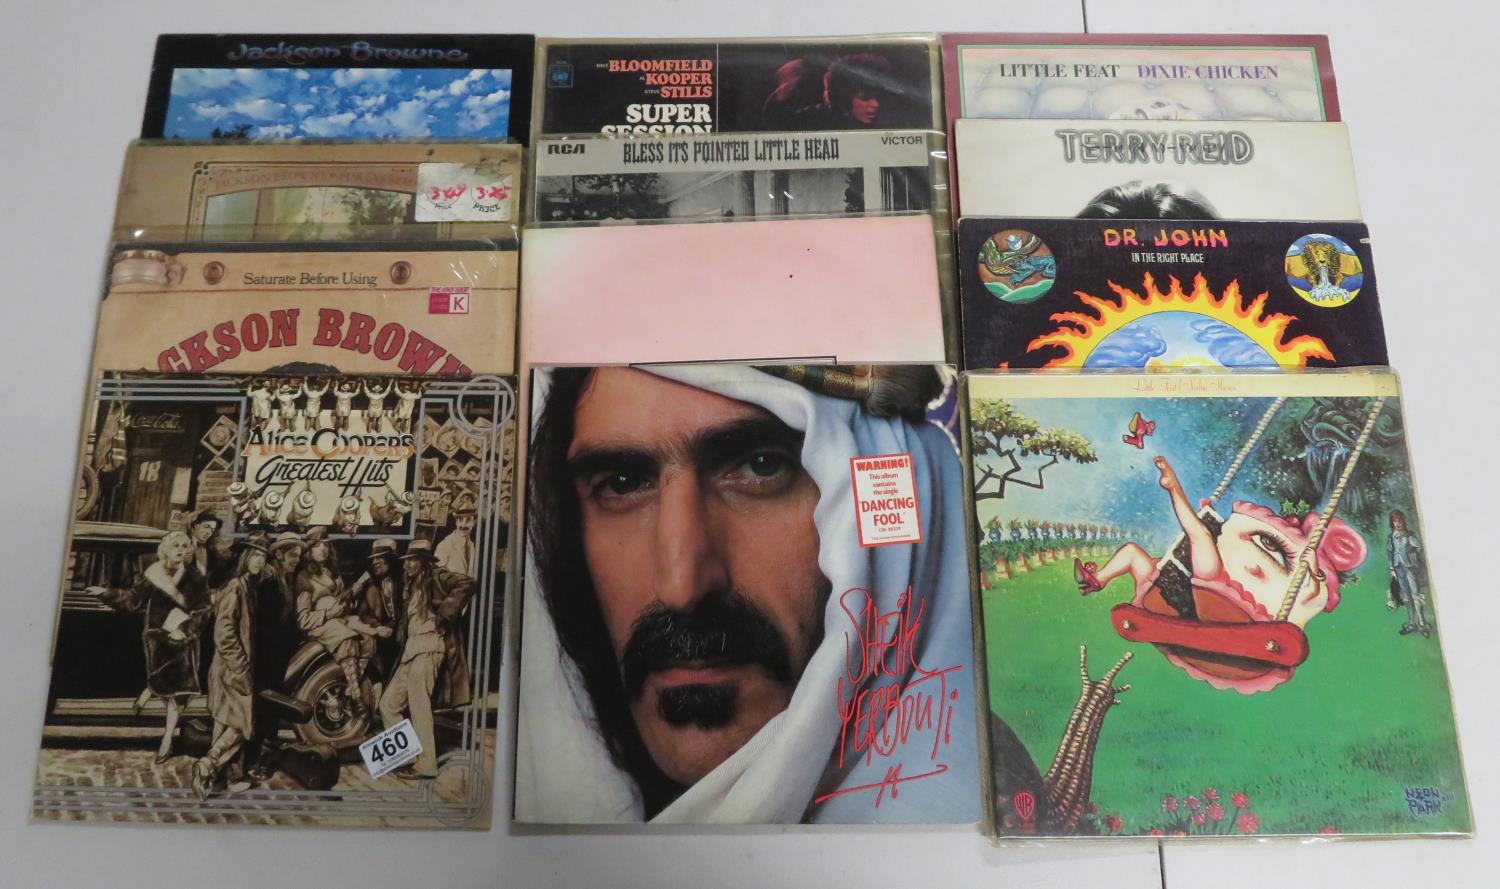 12x 33rpm albums including Alice Cooper, Jackson Brown, Frank Zappa, Jefferson Airplane etc - Image 2 of 2